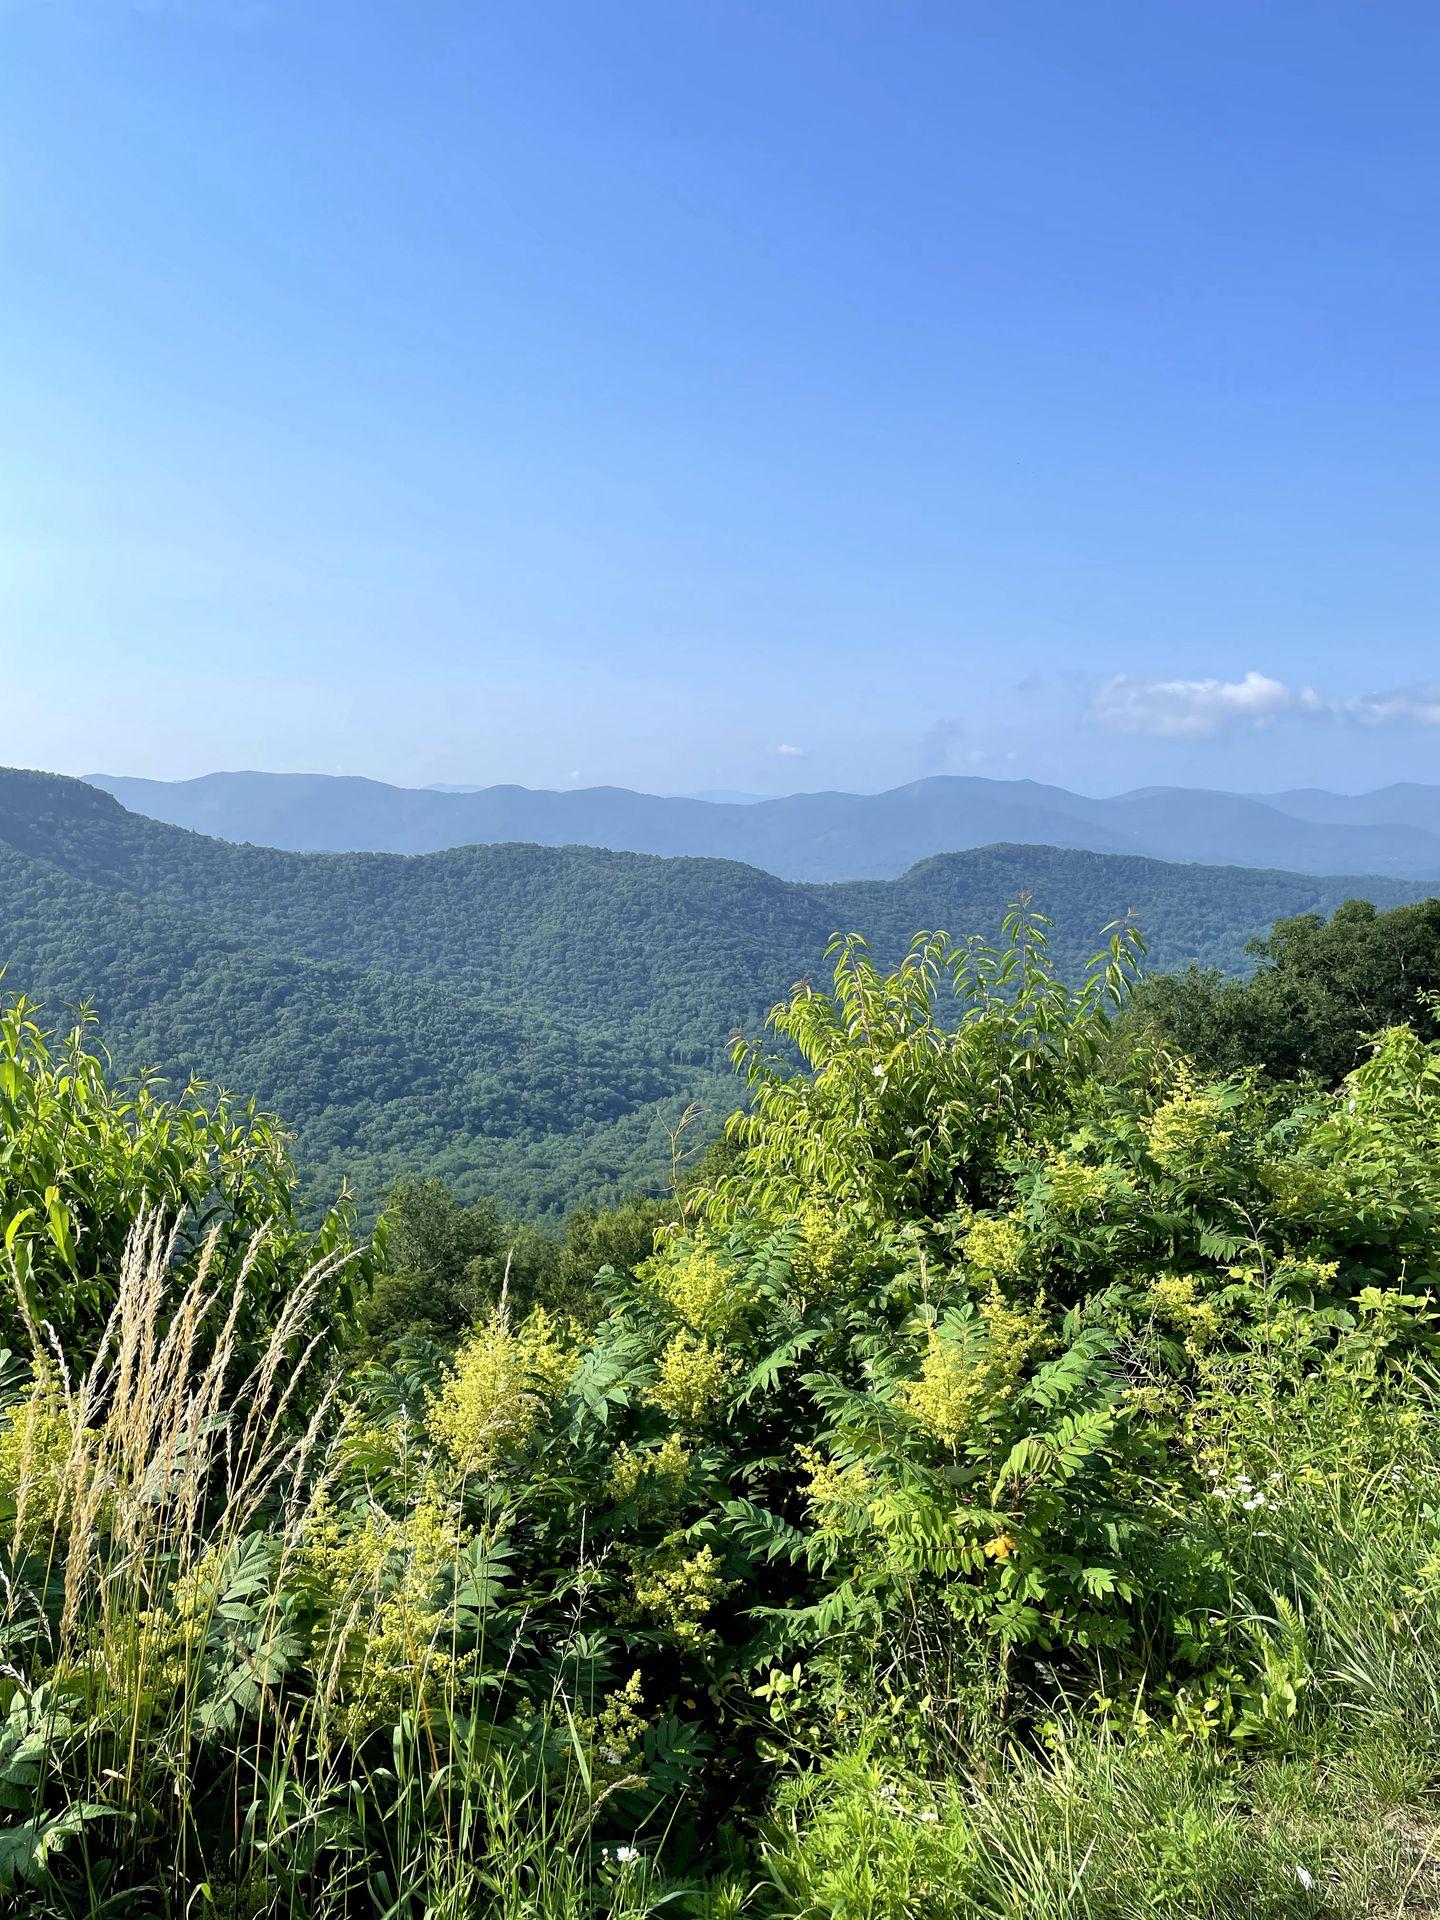 A view of the Blue Ridge Mountains with greenery in the foreground.